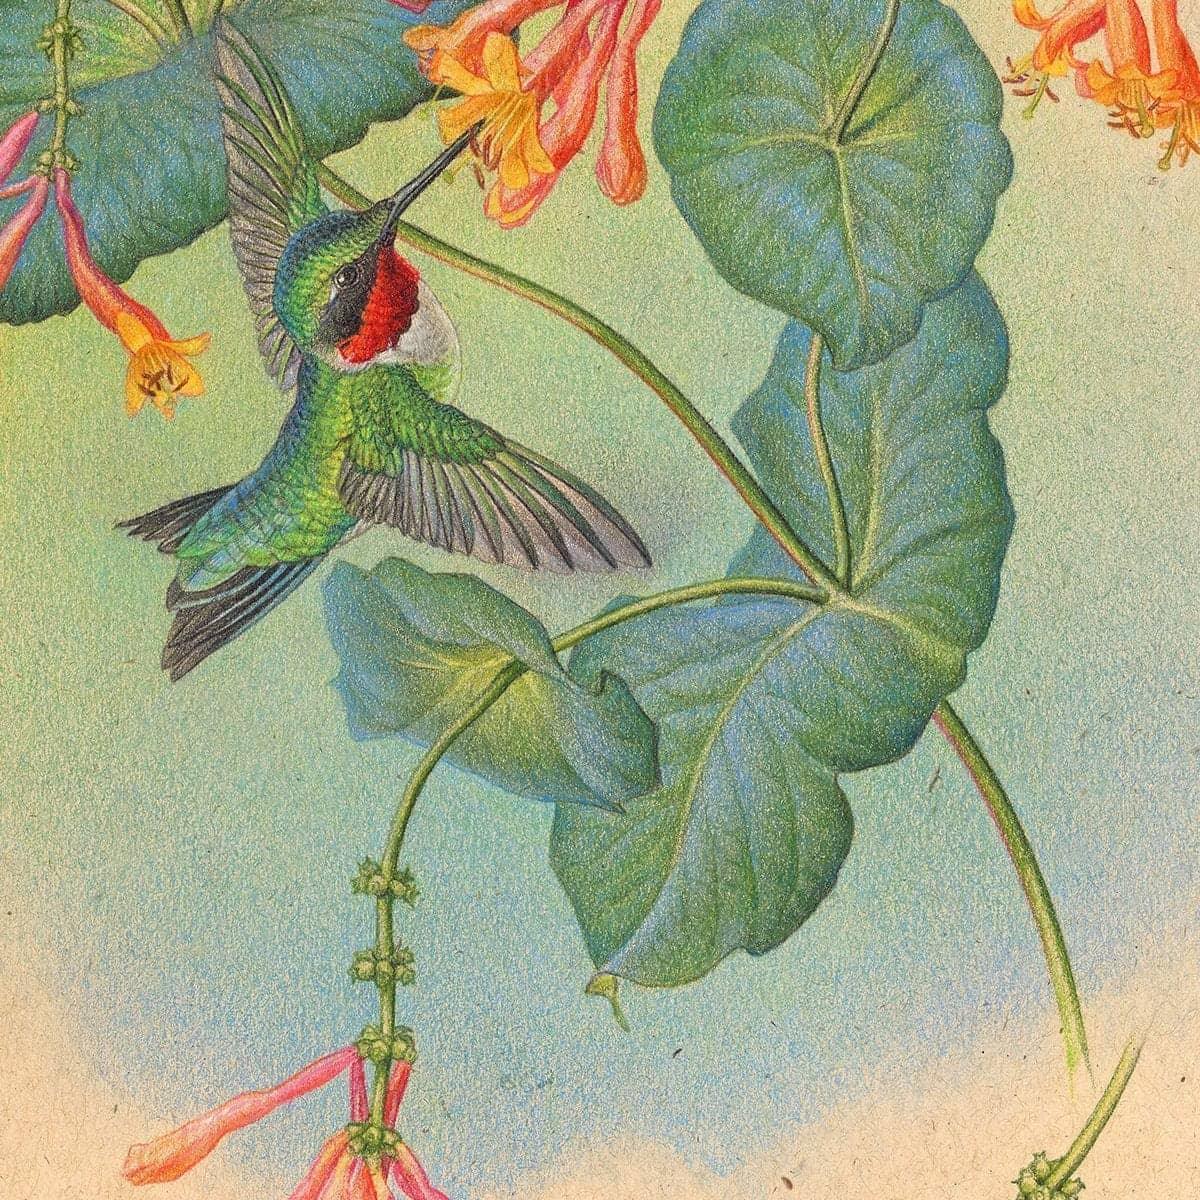 Ruby-throated Hummingbirds with Trumpet Flower - Art Print | Artwork by Glen Loates